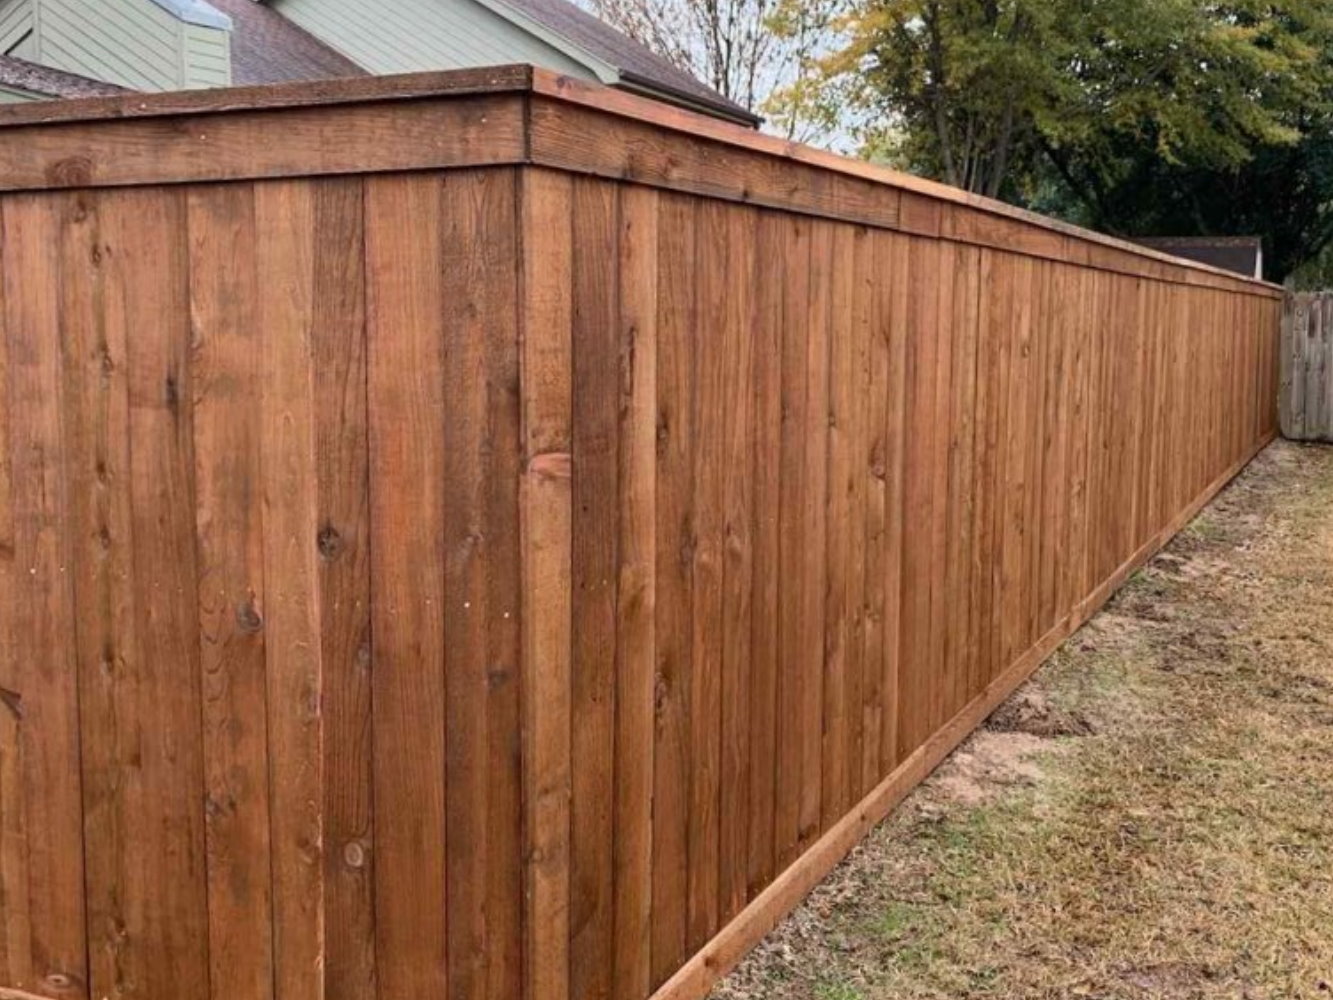 Hooks TX cap and trim style wood fence